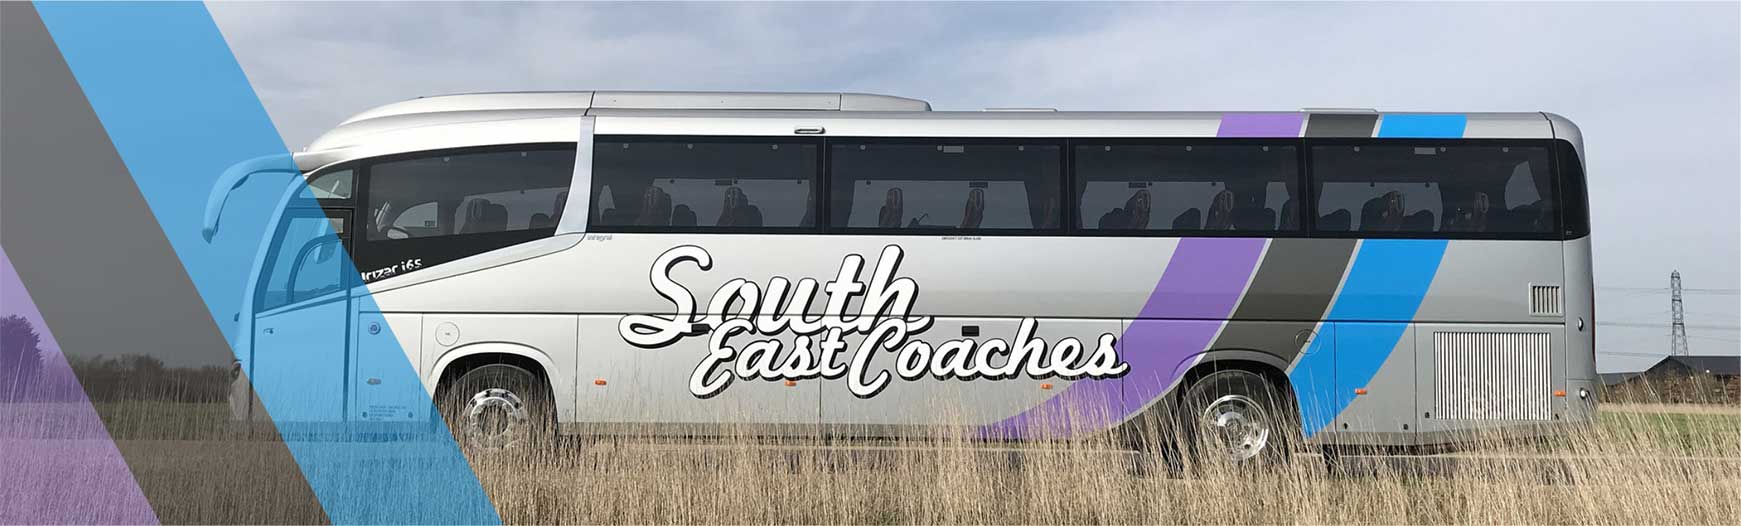 south east coaches banner